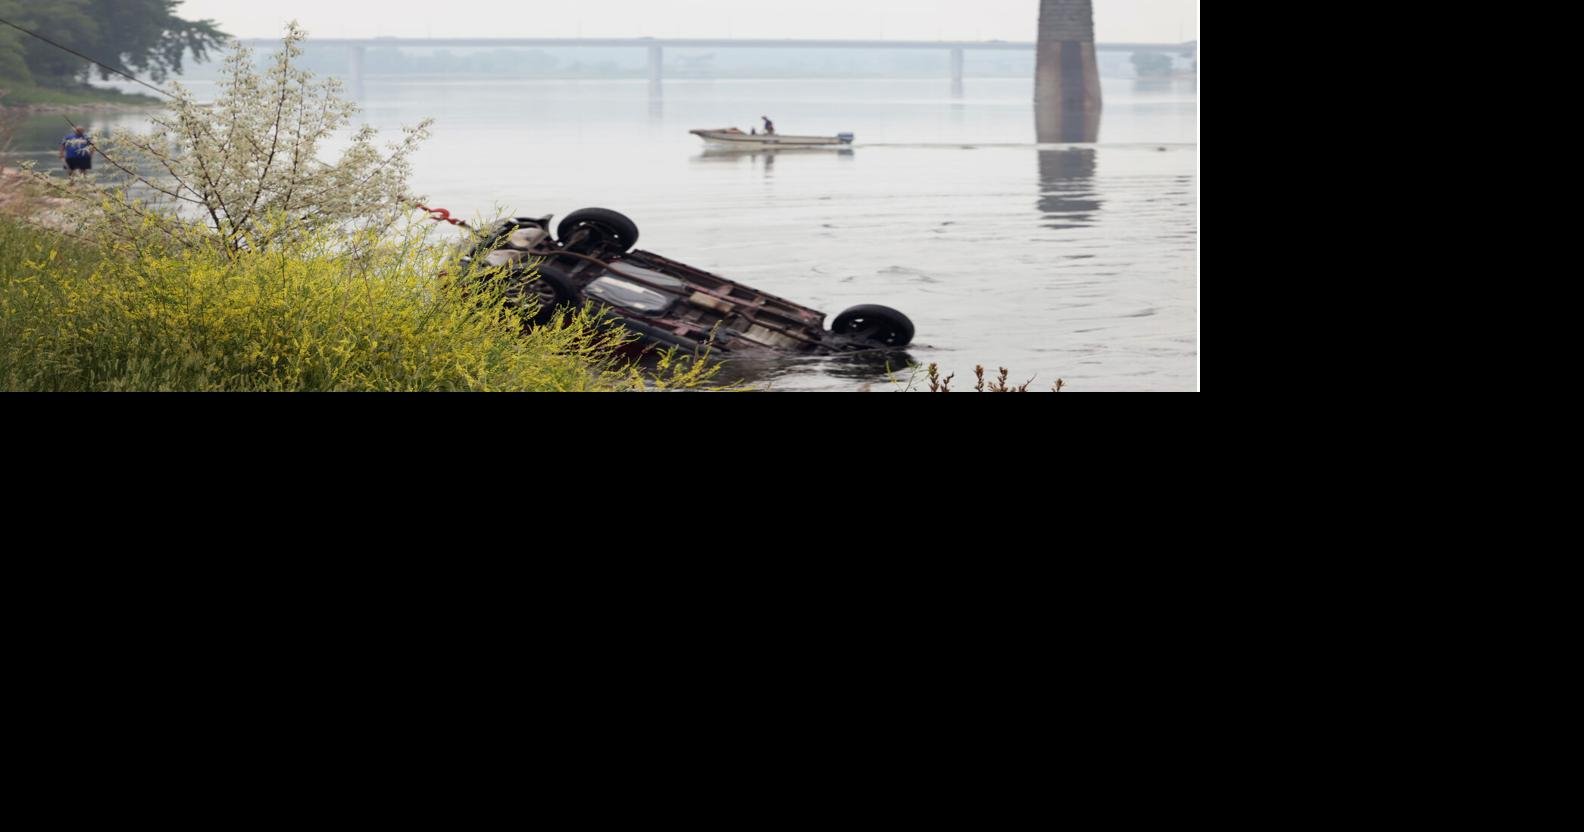 Car ends up in Missouri River; driver suffers minor injuries